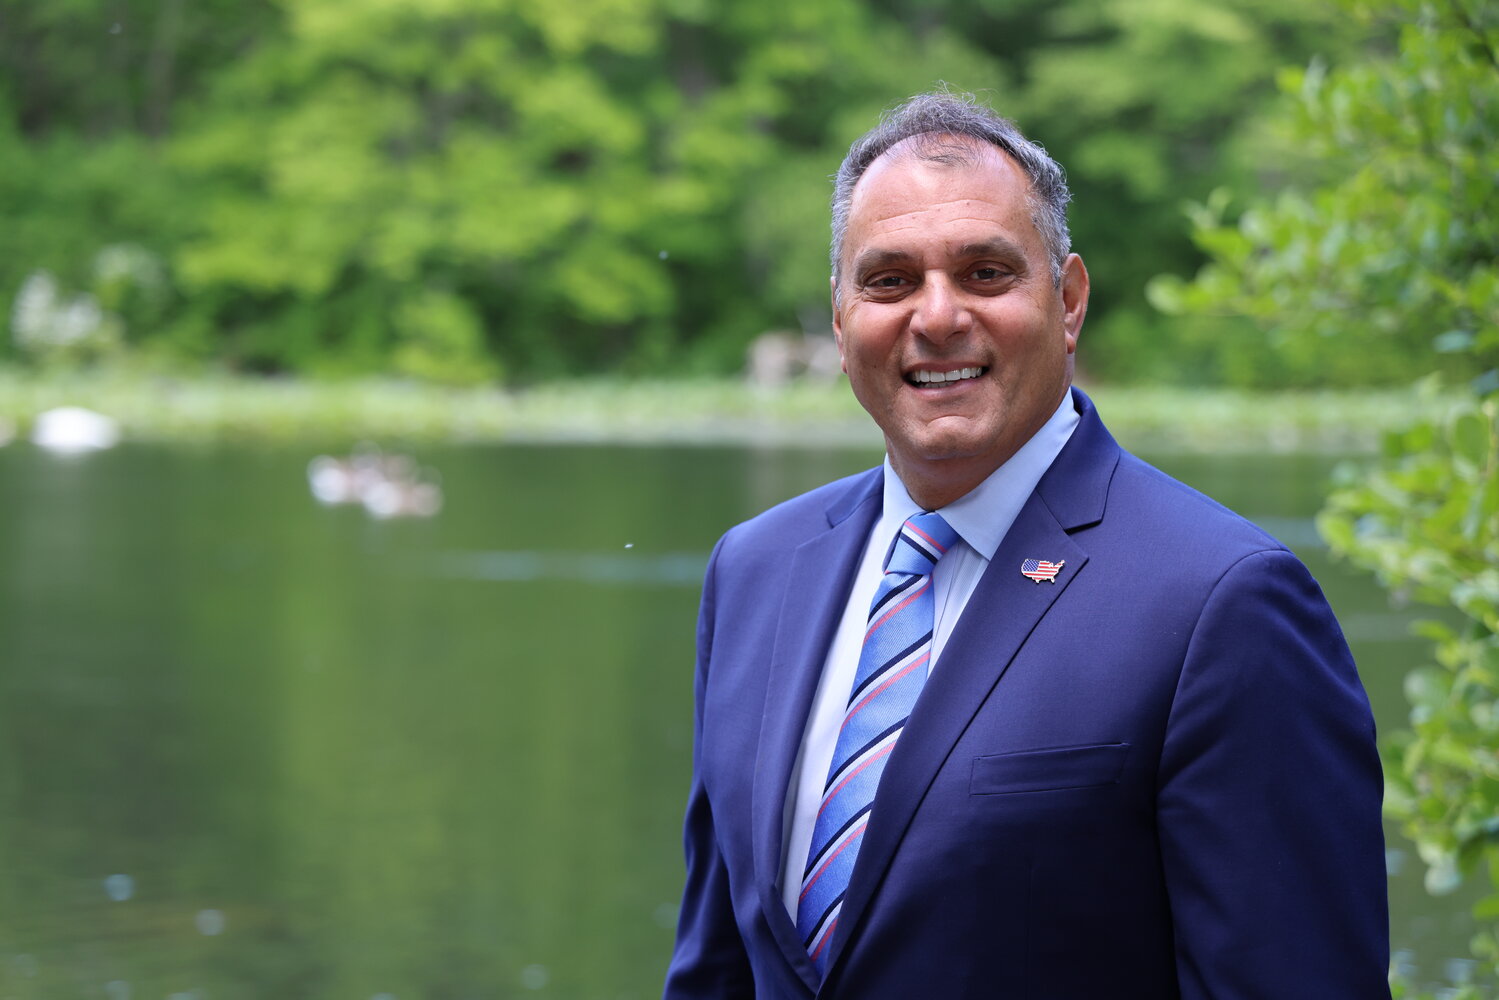 Joseph Saladino, supervisor of the Town of Oyster Bay, highlighted his 35 years of experience as he gears up for the November election.